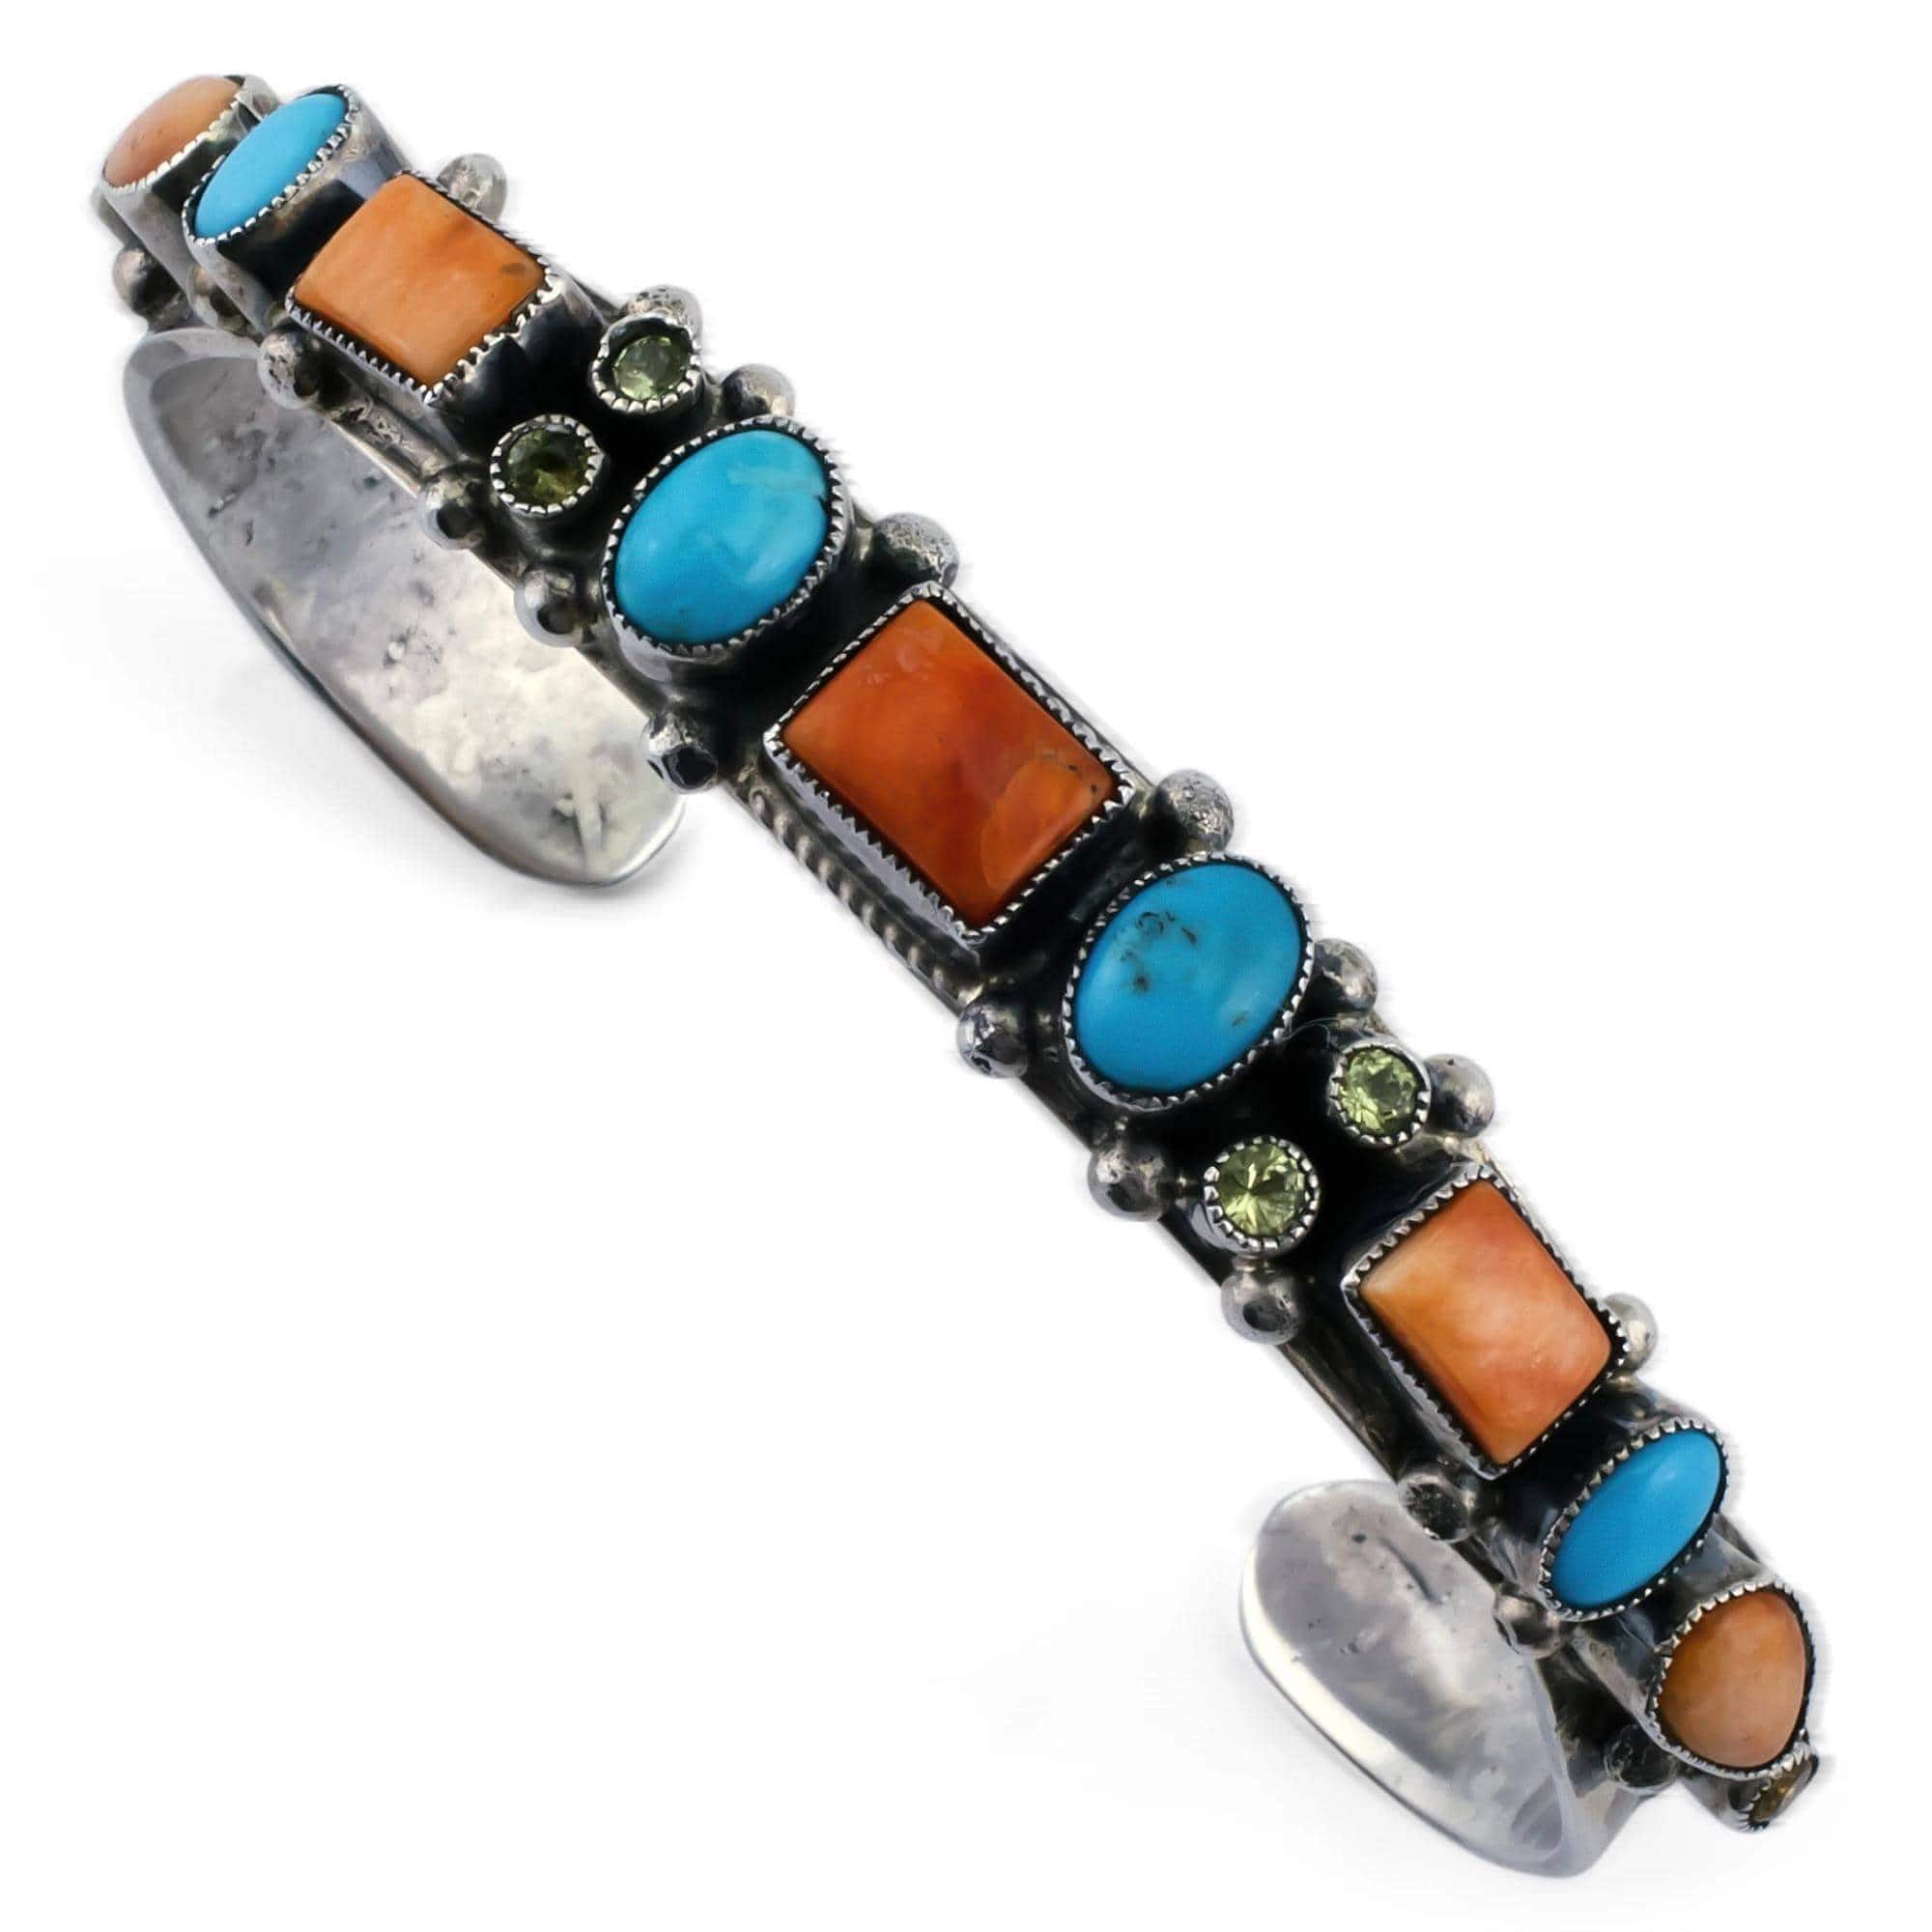 Kalifano Native American Jewelry Leo Feeney Sleeping Beauty Turquoise, Spiny Oyster Shell, and Peridot USA Native American Made 925 Sterling Silver Cuff NAB1600.002